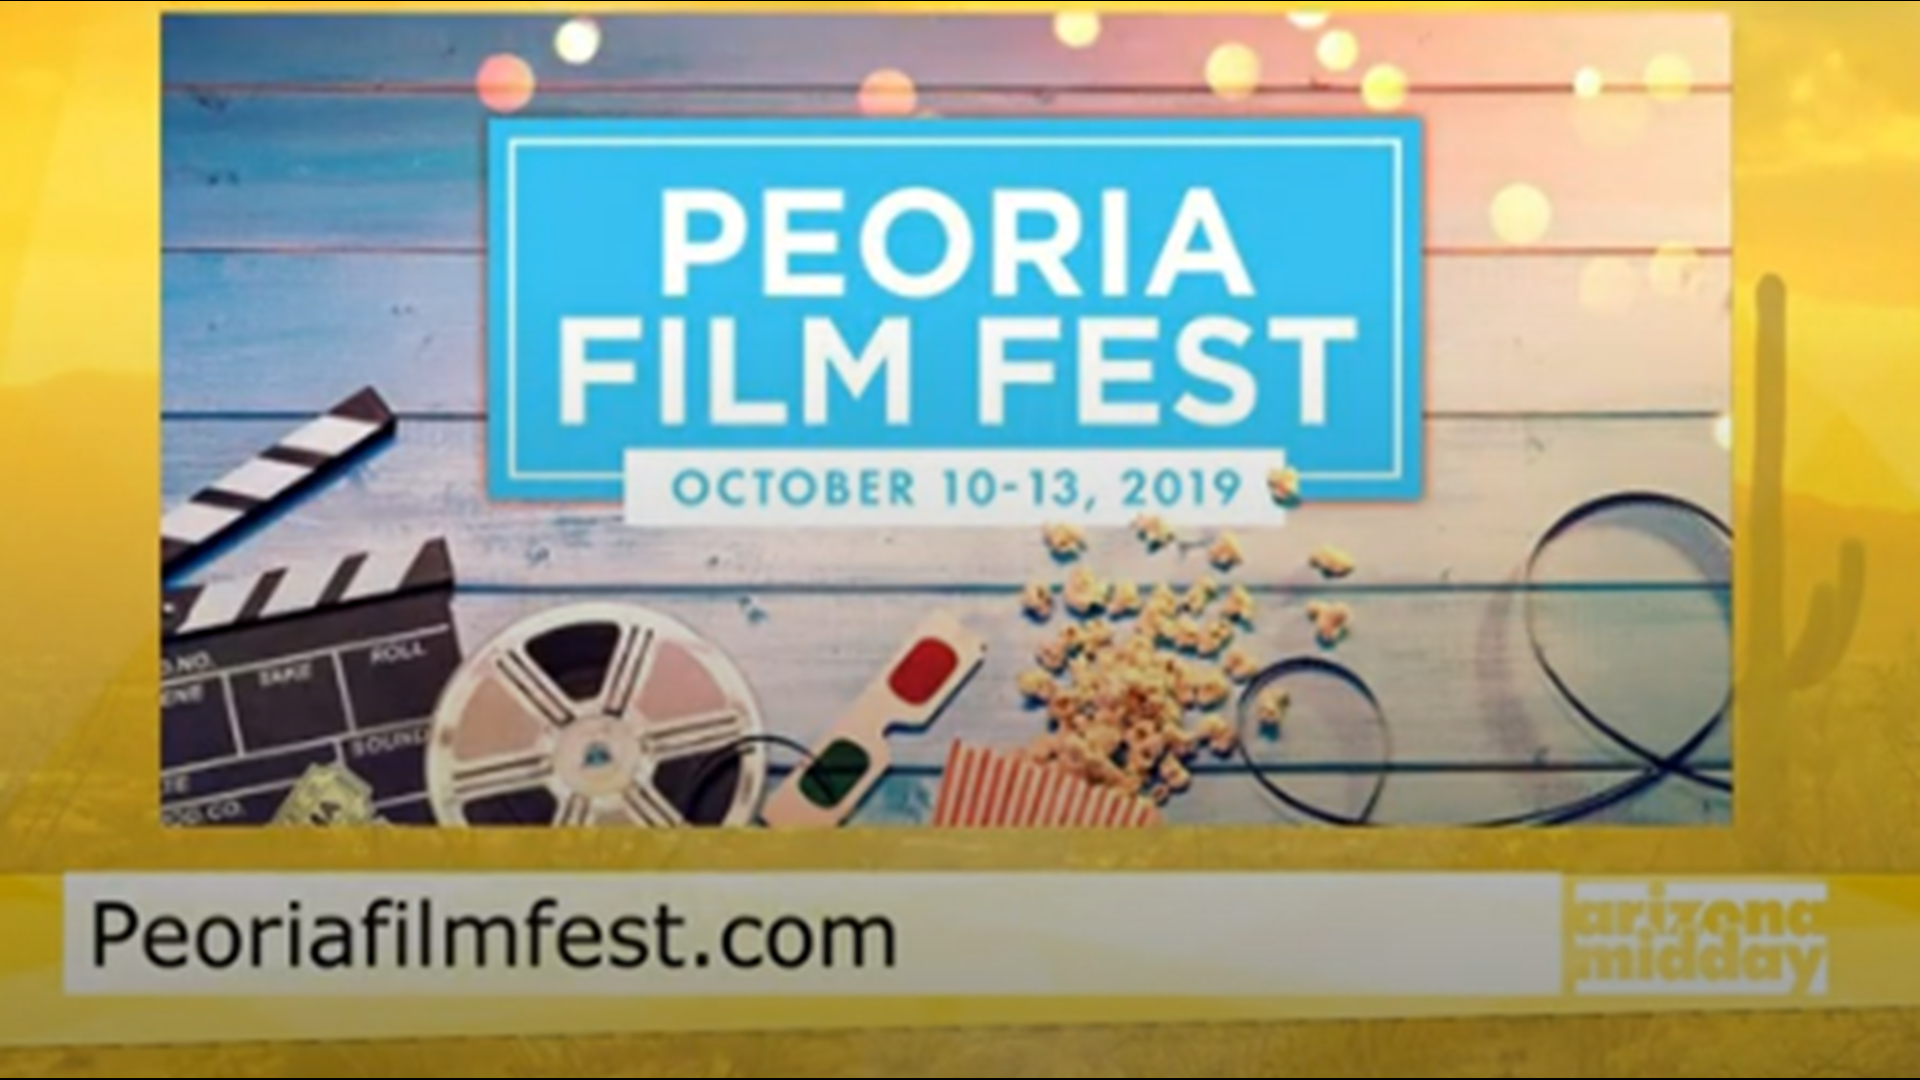 Jason Carney, Executive Director of the Phoenix Film Festival gets us excited about the upcoming film fest and how we can purchase tickets.